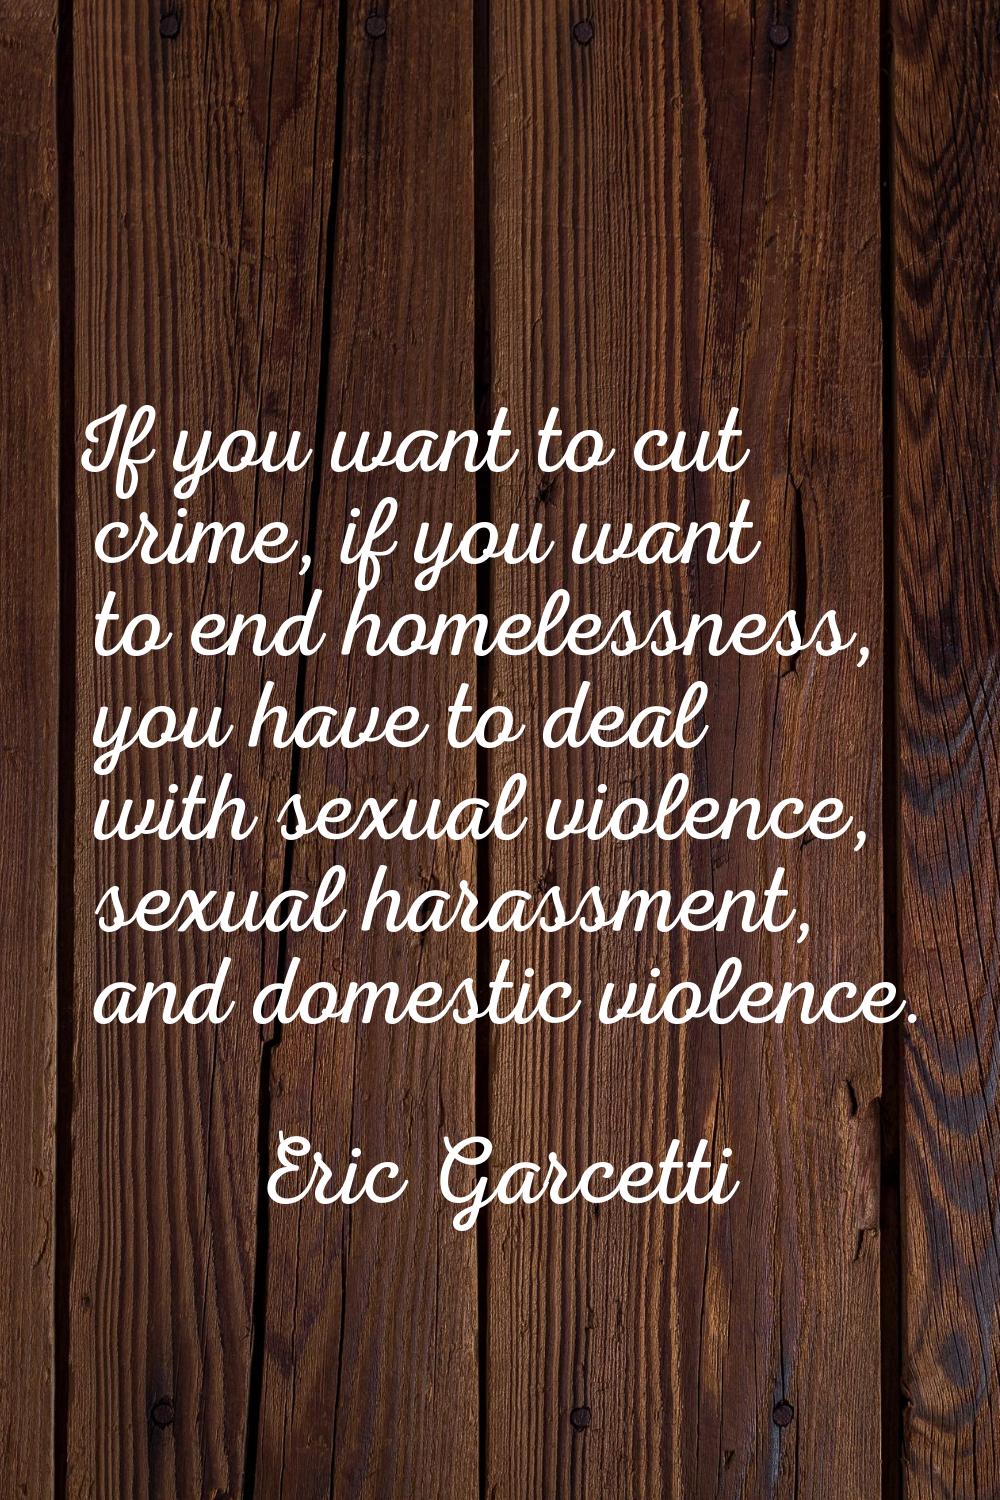 If you want to cut crime, if you want to end homelessness, you have to deal with sexual violence, s